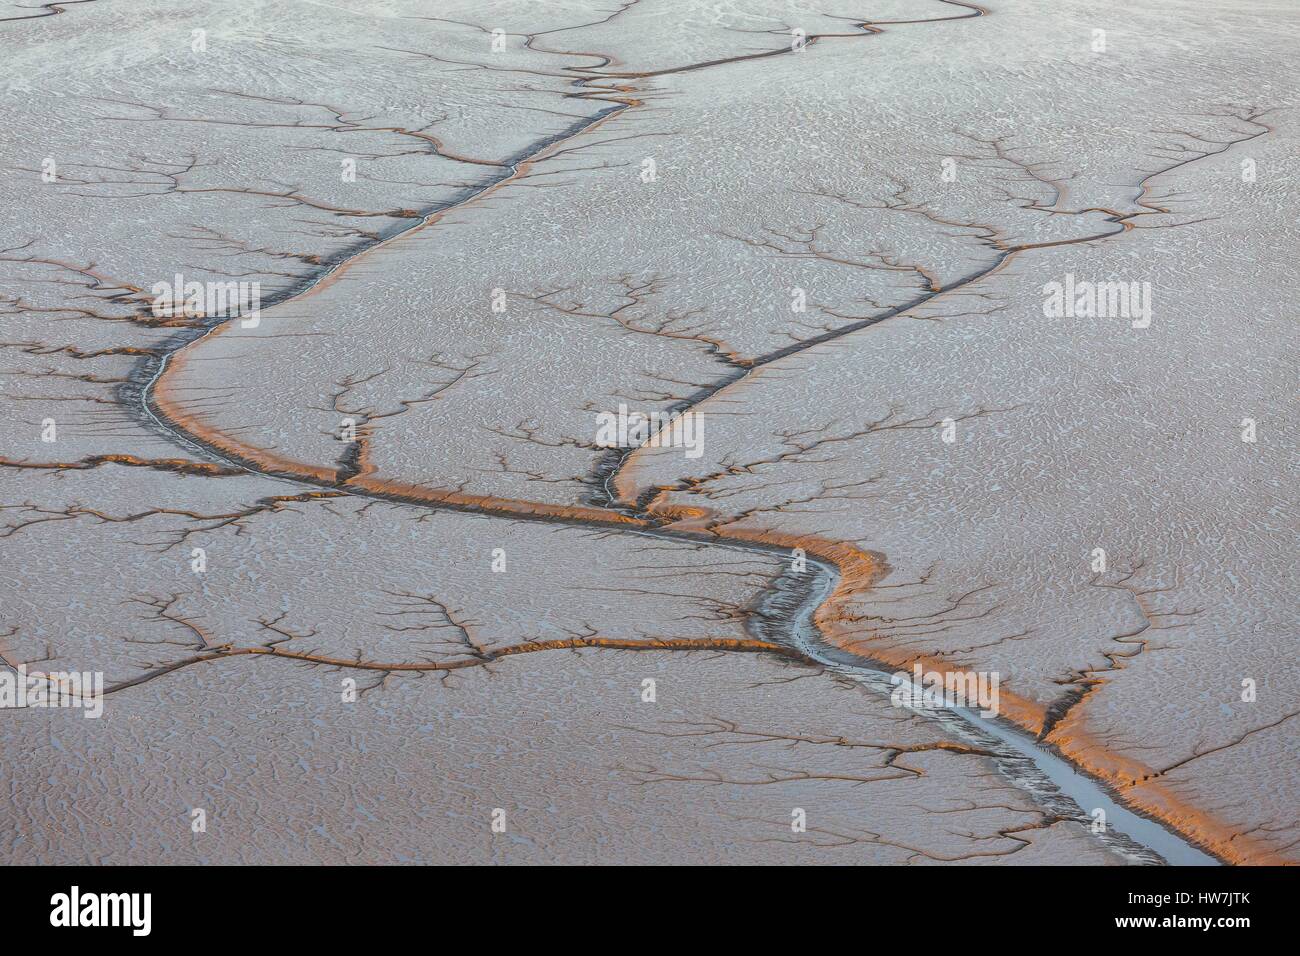 France, Vendee, L'Aiguillon sur Mer, graphics in l'Aiguillon bay at low tide (aerial view) Stock Photo